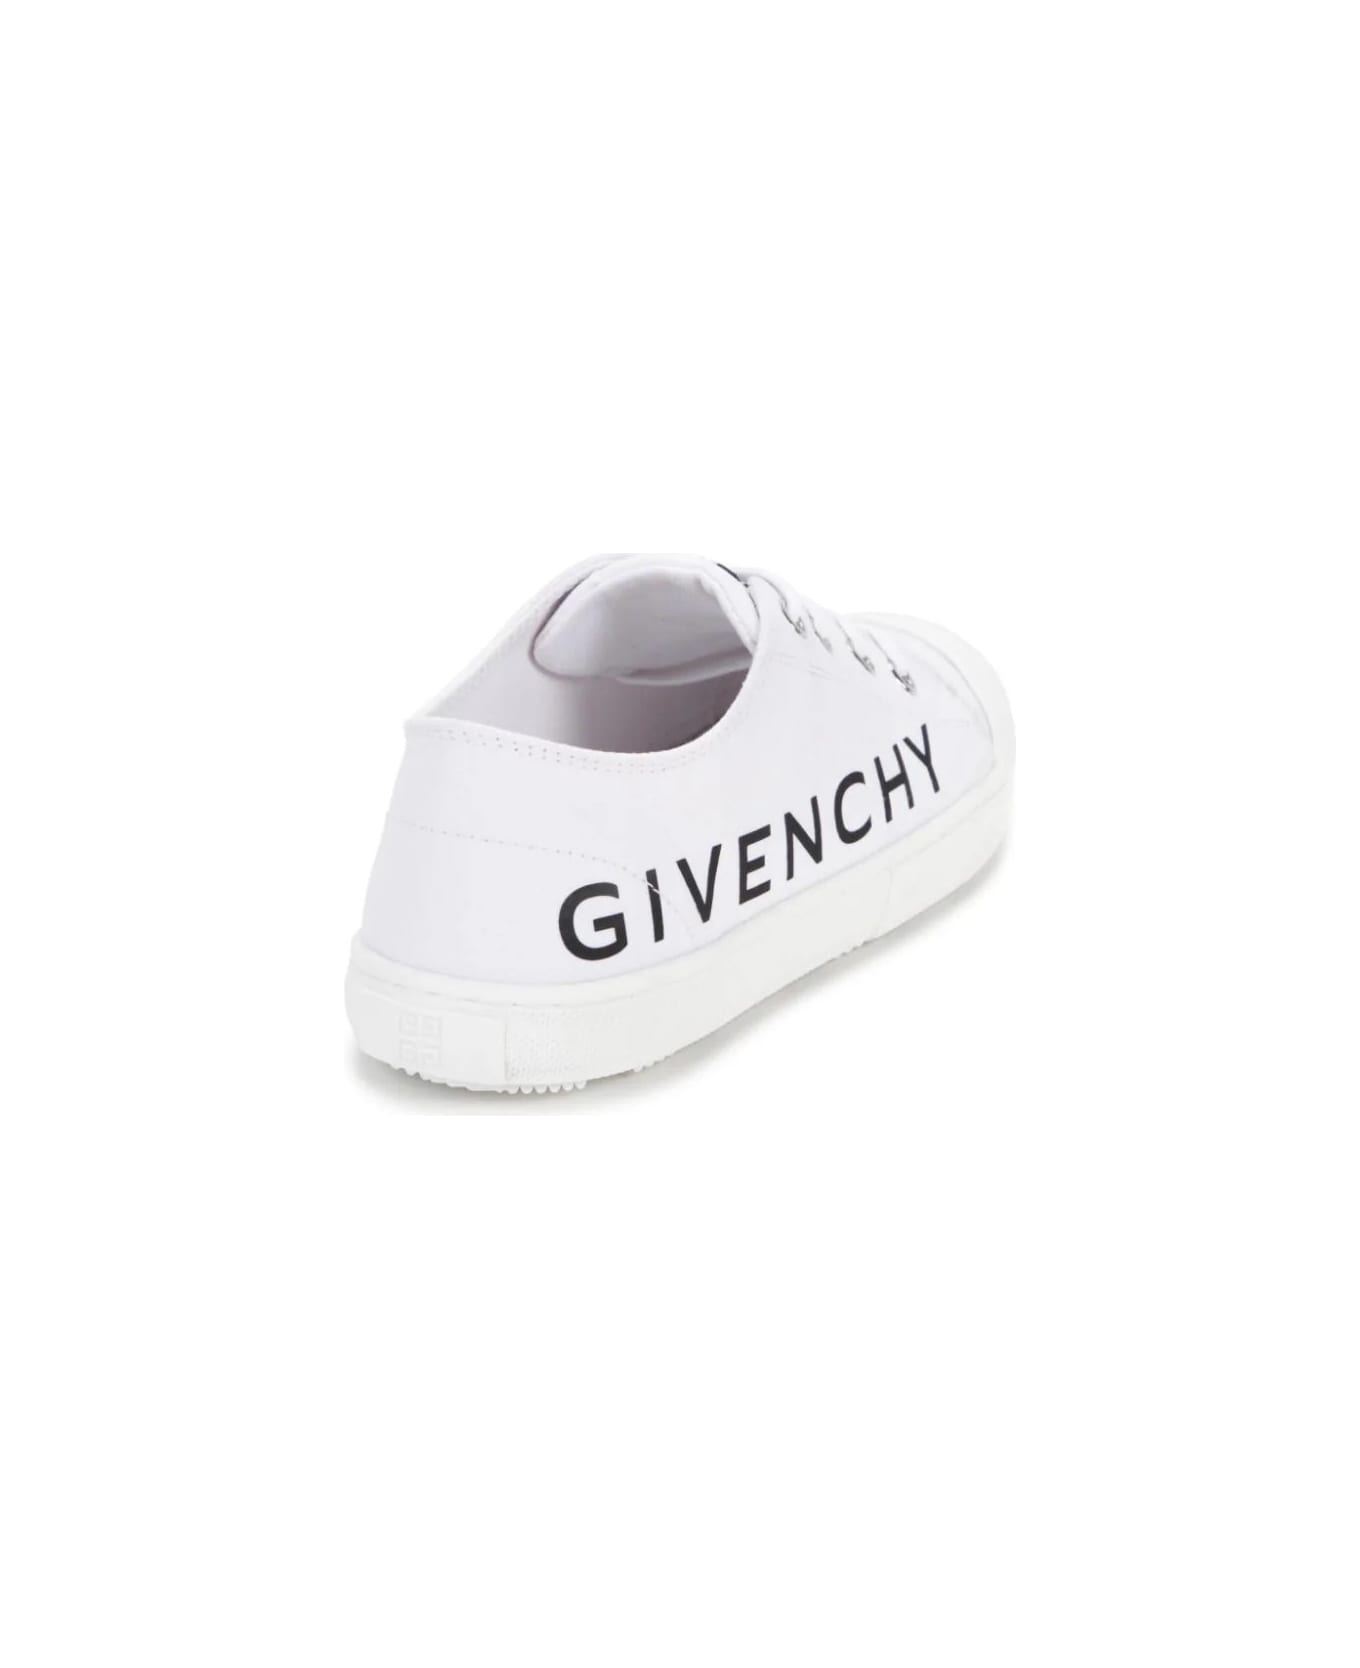 Givenchy White Low Sneakers With Givenchy Signature - White